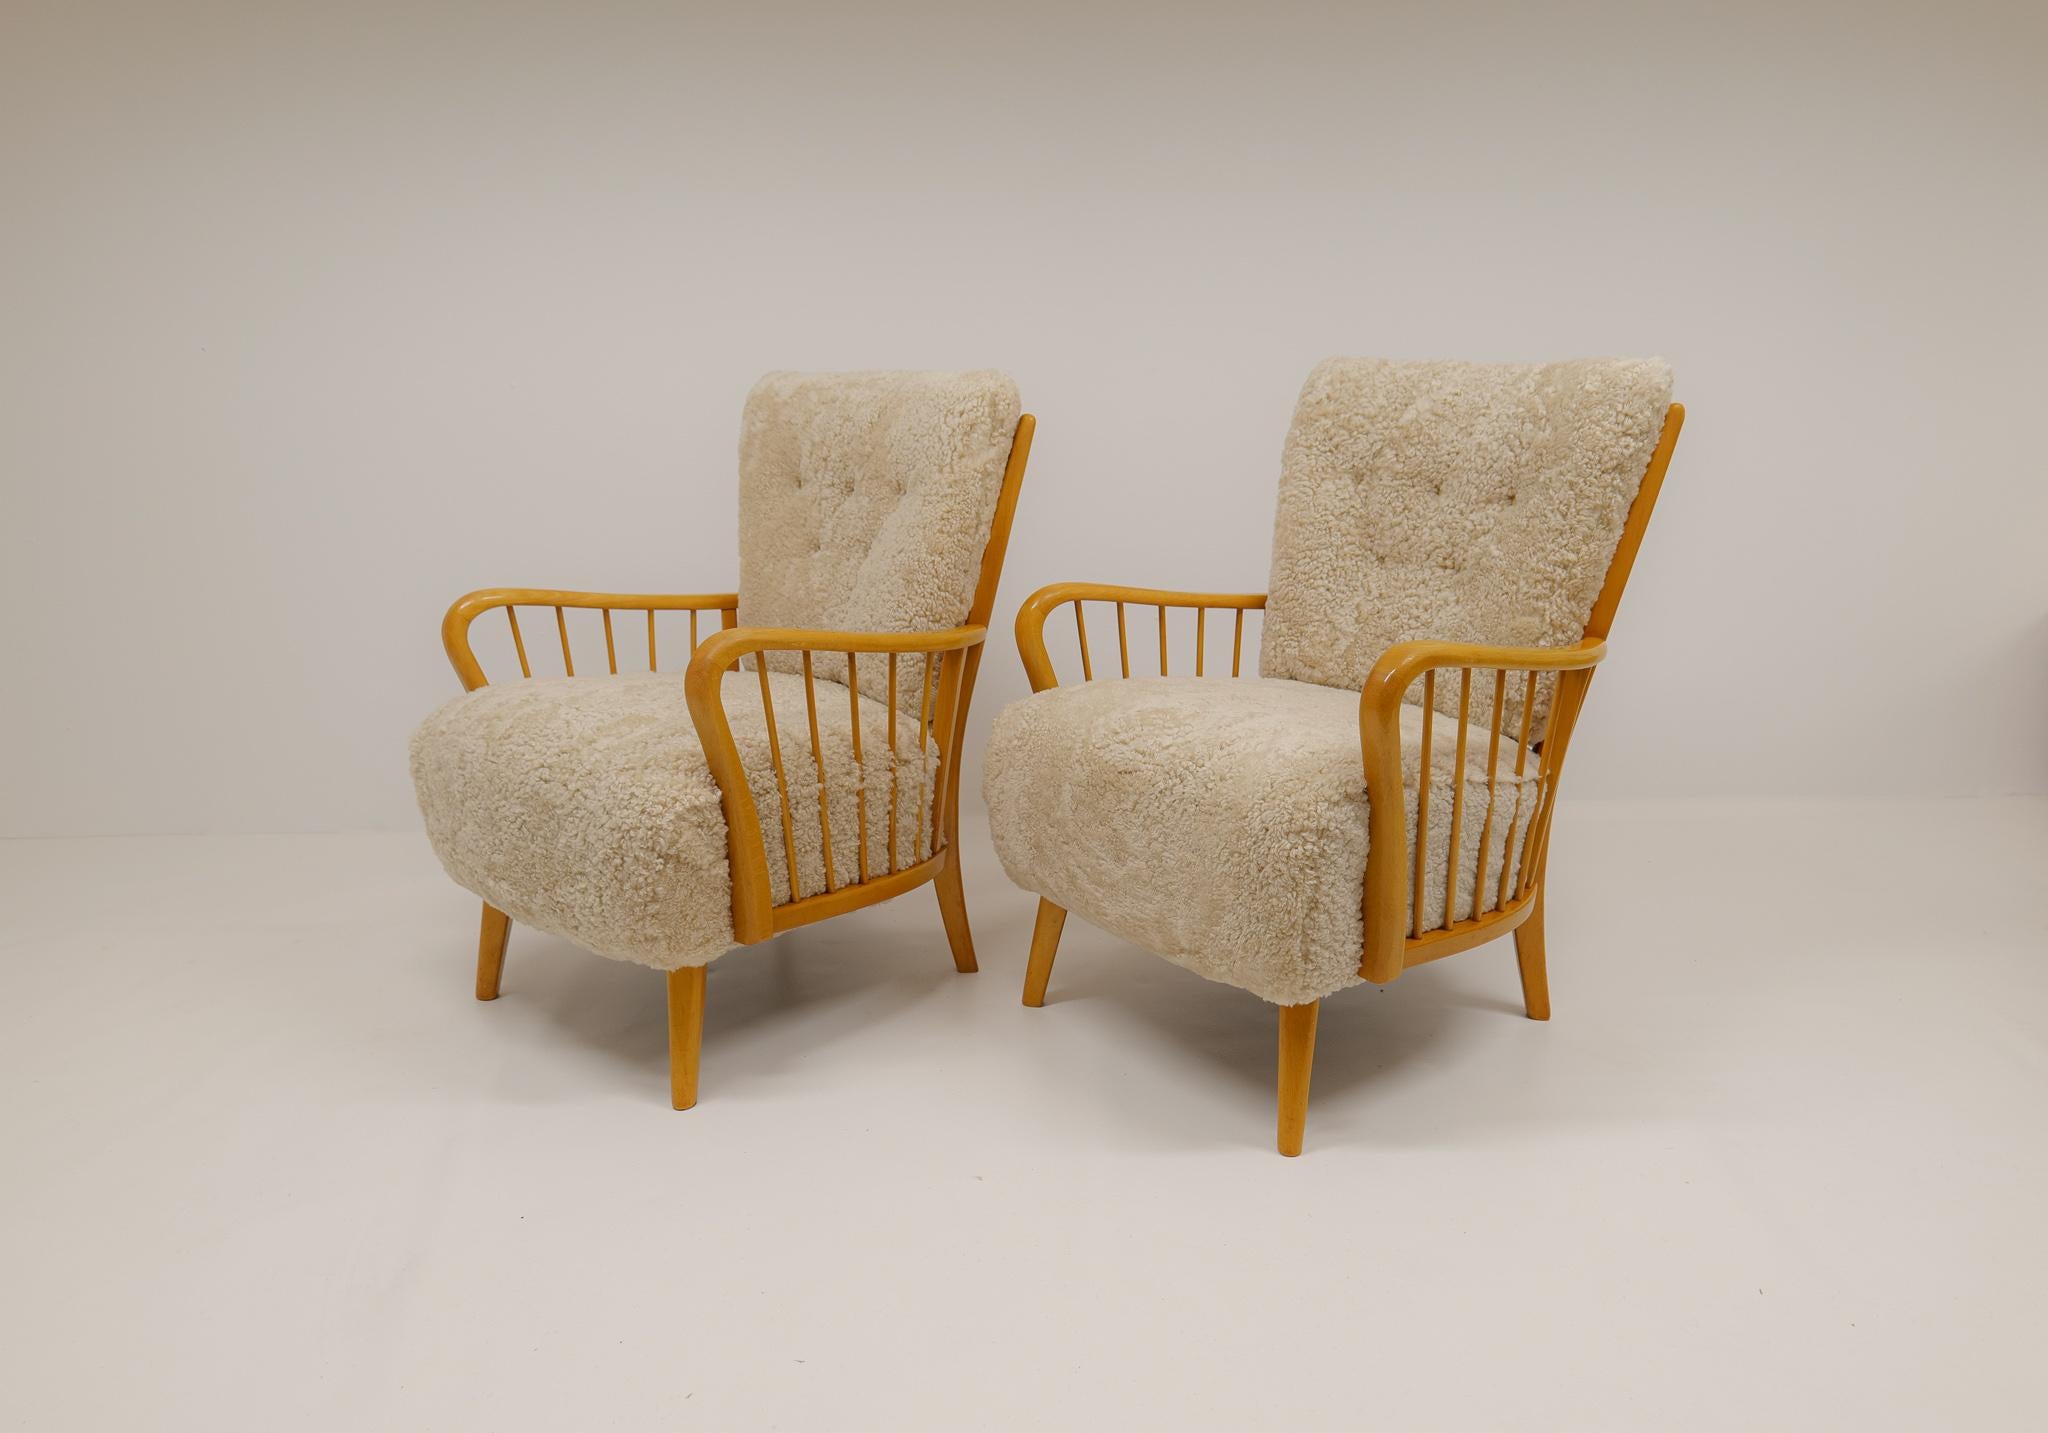 Mid-20th Century Art Deco Swedish Grace Lounge Chairs in Shearling / Sheepskin 1940s Sweden For Sale